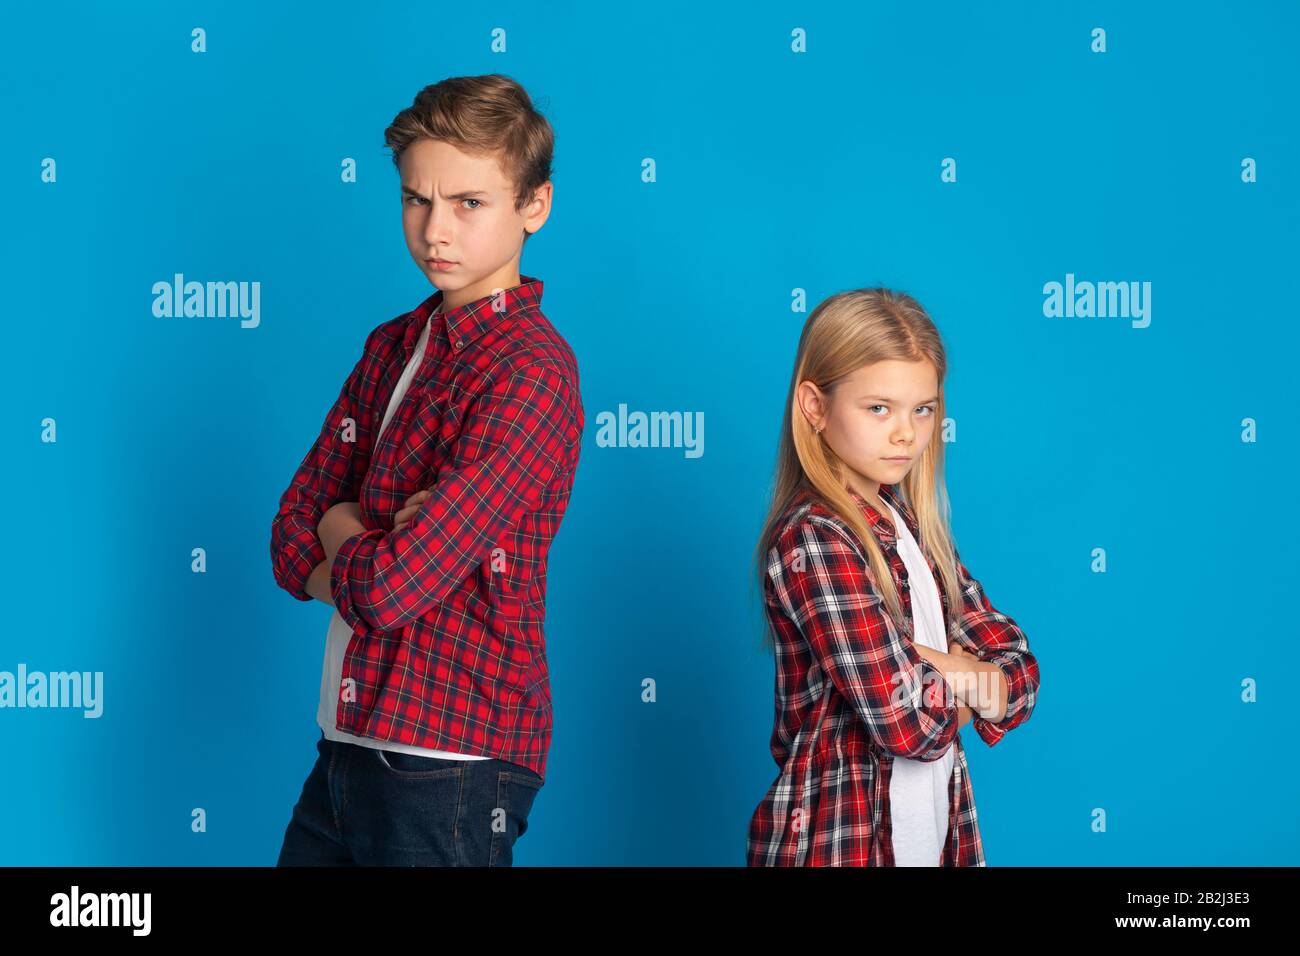 Siblings Conflicts. Offended Brother And Sister Ignoring Each Other After Quarrel Stock Photo